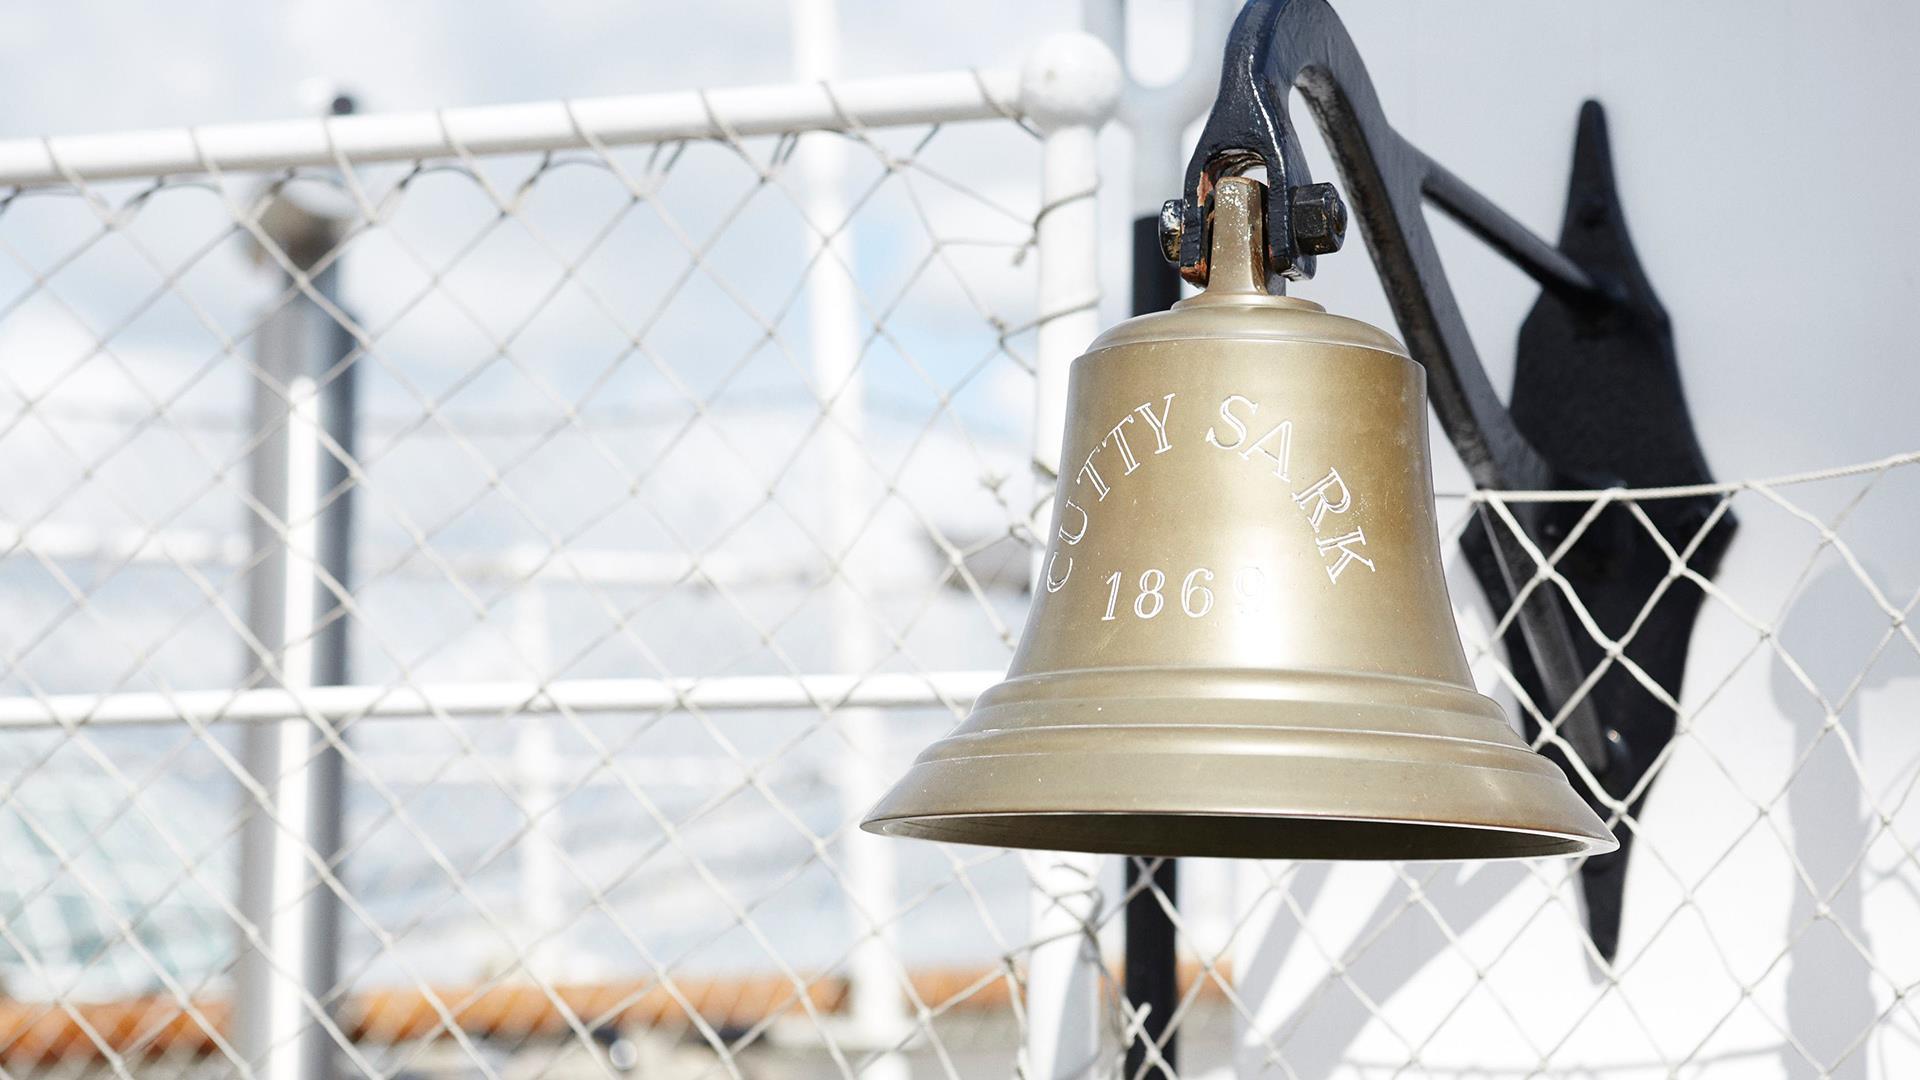 The bell on the upper deck of Cutty Sark in Greenwich. Inscribed Cutty Sark 1869.